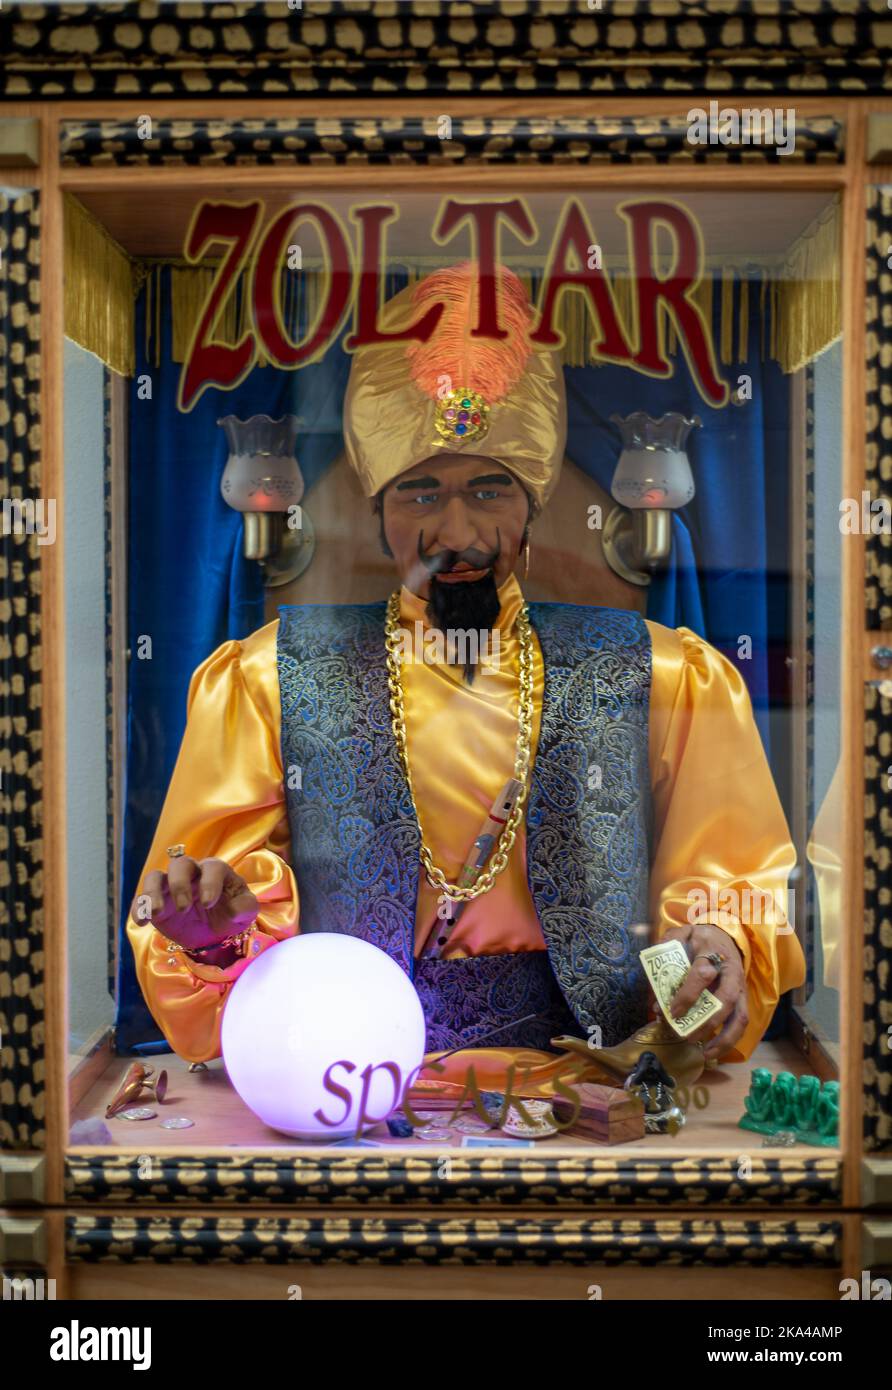 A fortunate telling machine containing Zoltar, an animatronic fortune teller. Stock Photo